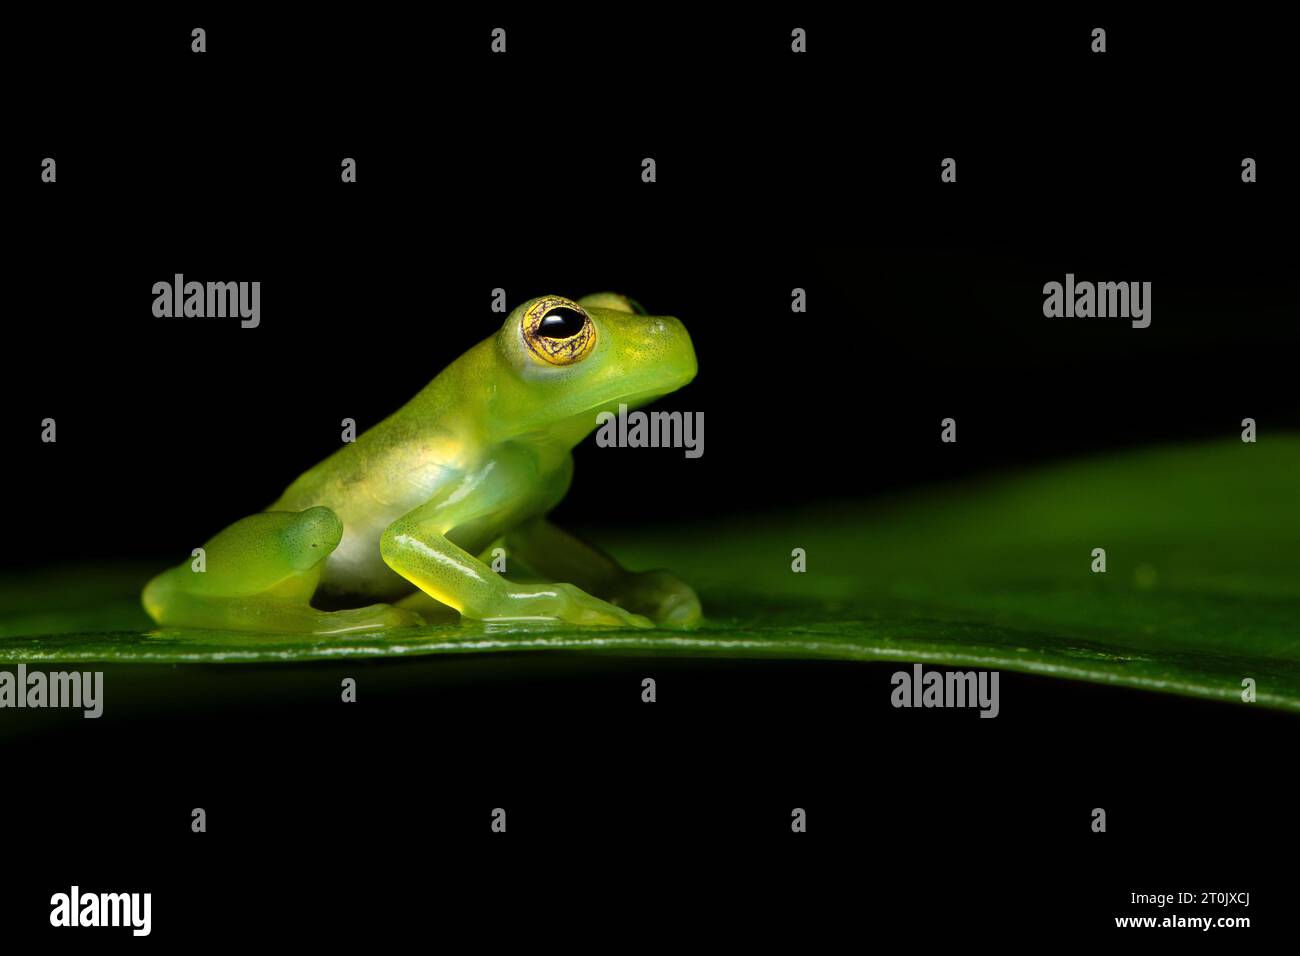 Teratohyla spinosa (common name: spiny Cochran frog) is a species of frog in the family Centrolenidae. Stock Photo